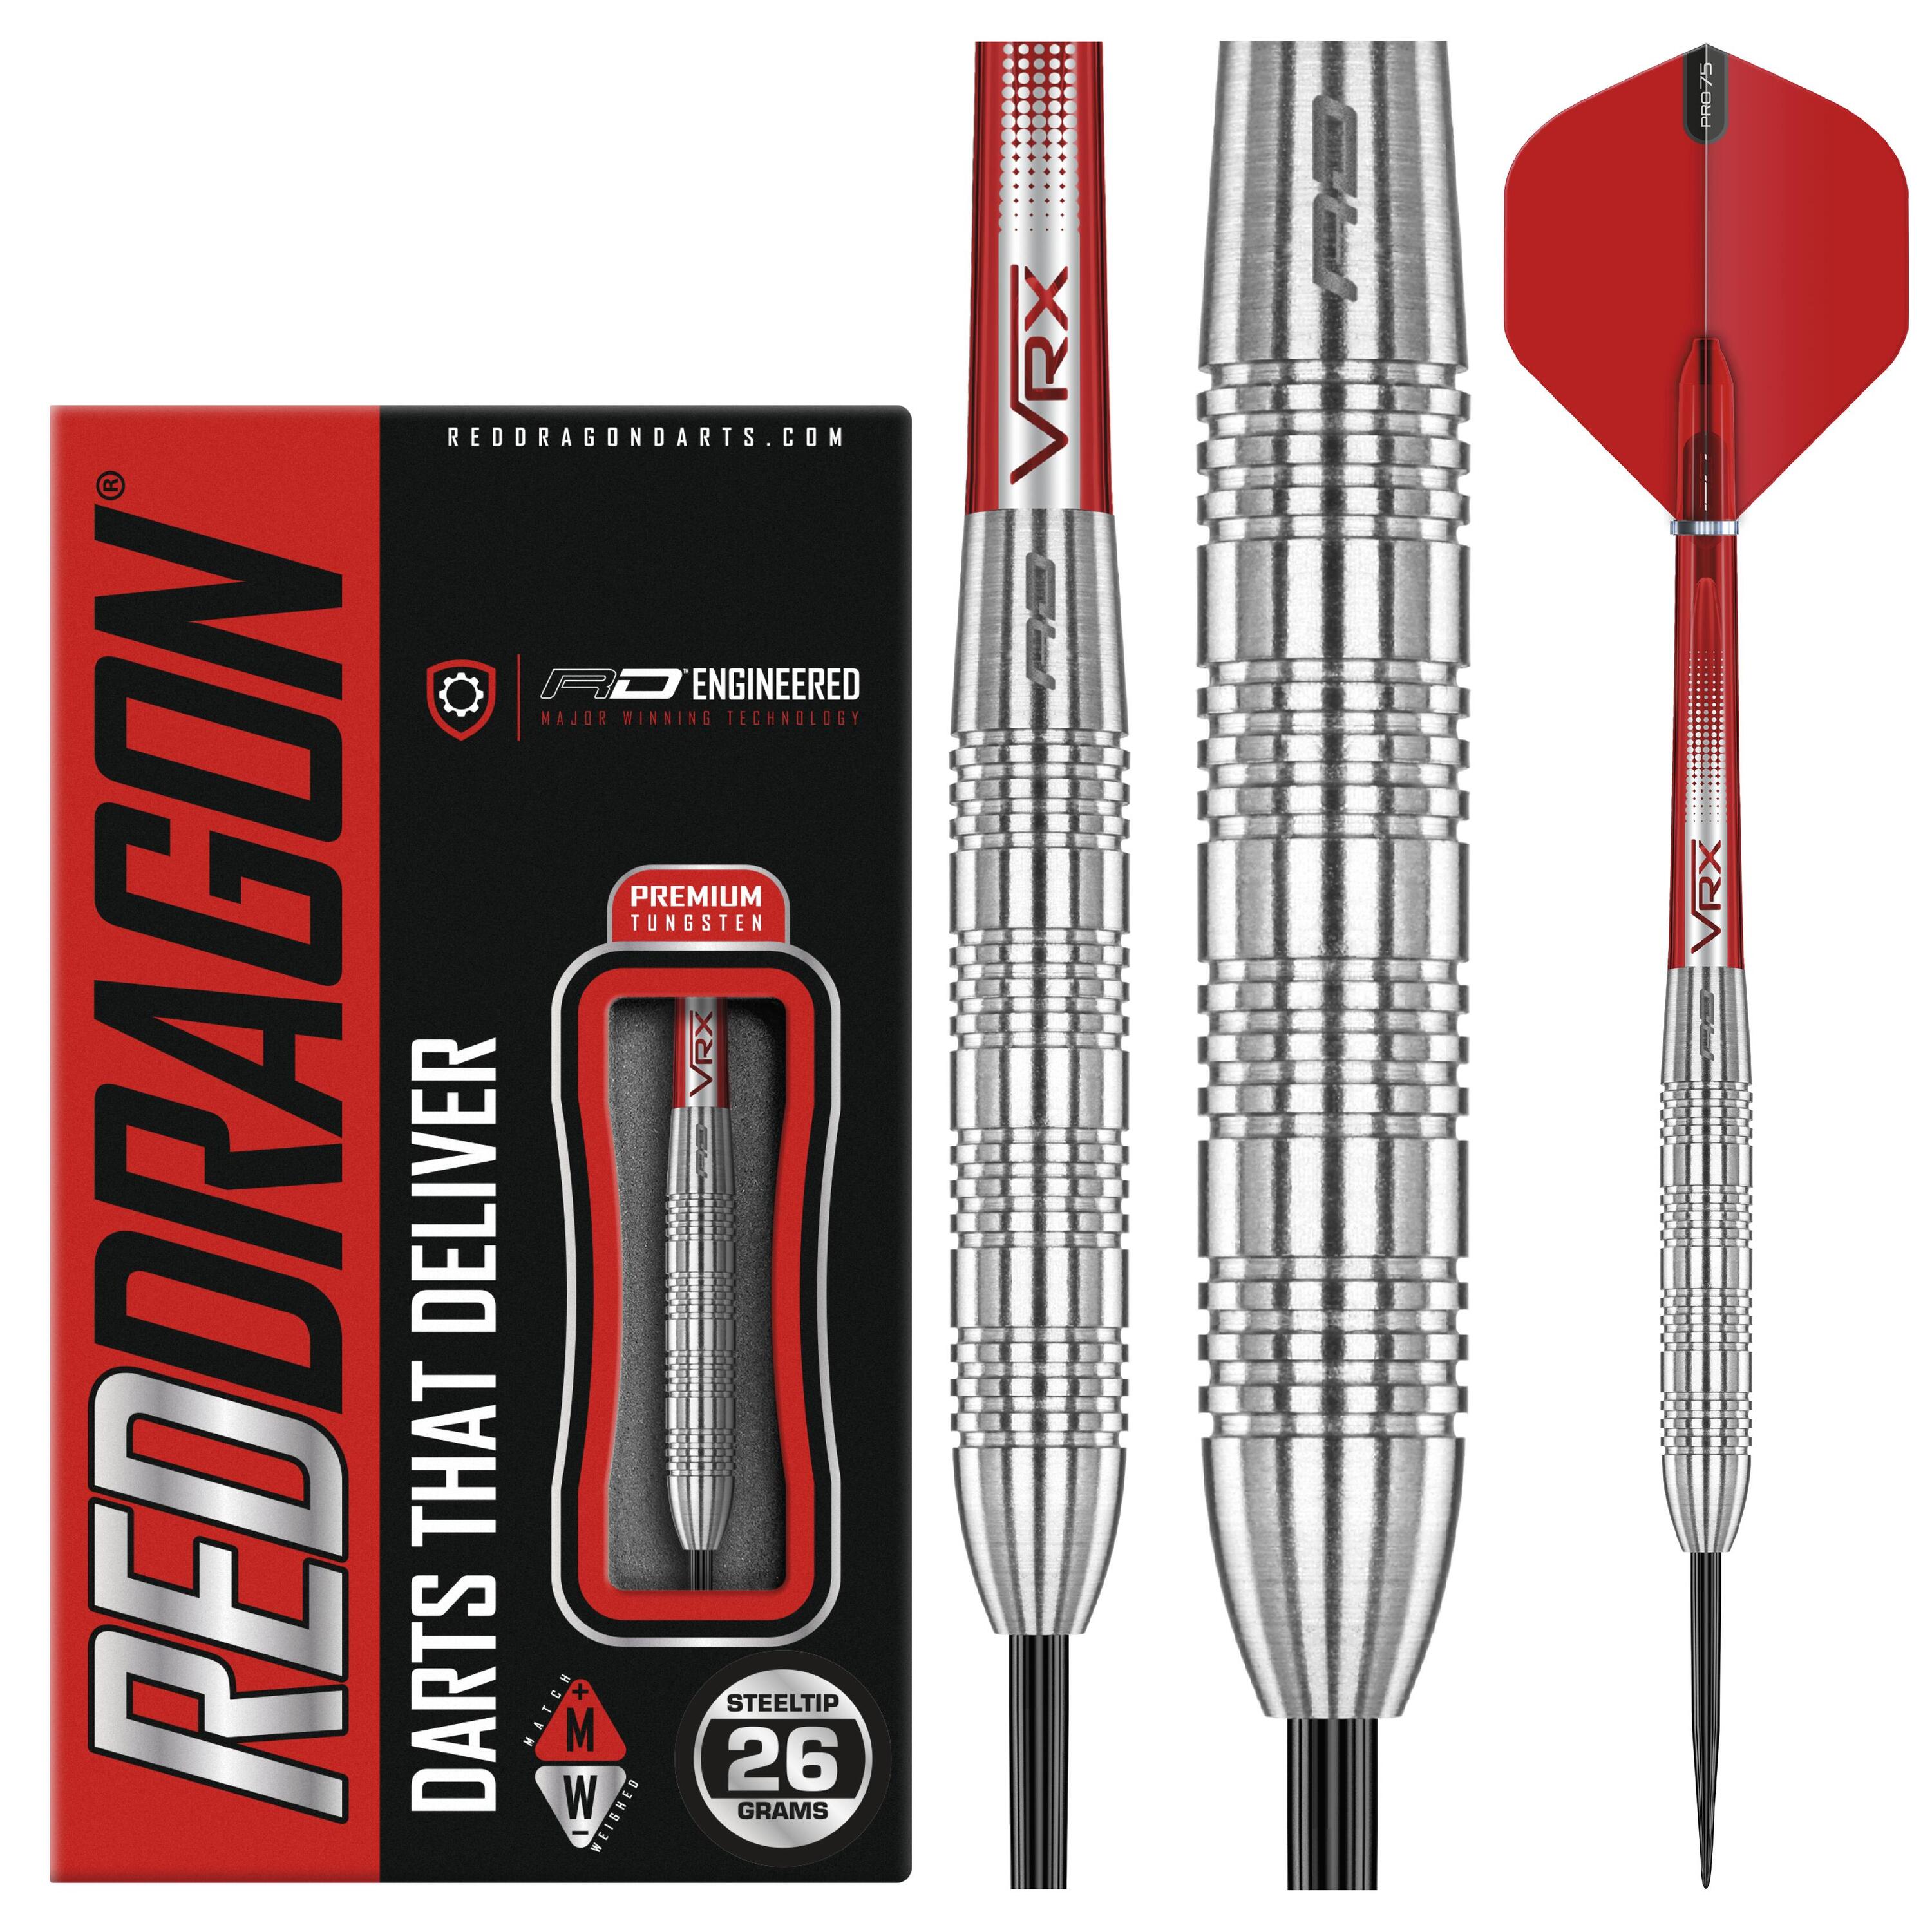 RED DRAGON DARTS RED DRAGON Hell Fire B 26 gram Tungsten Darts Set with Flights and Stems